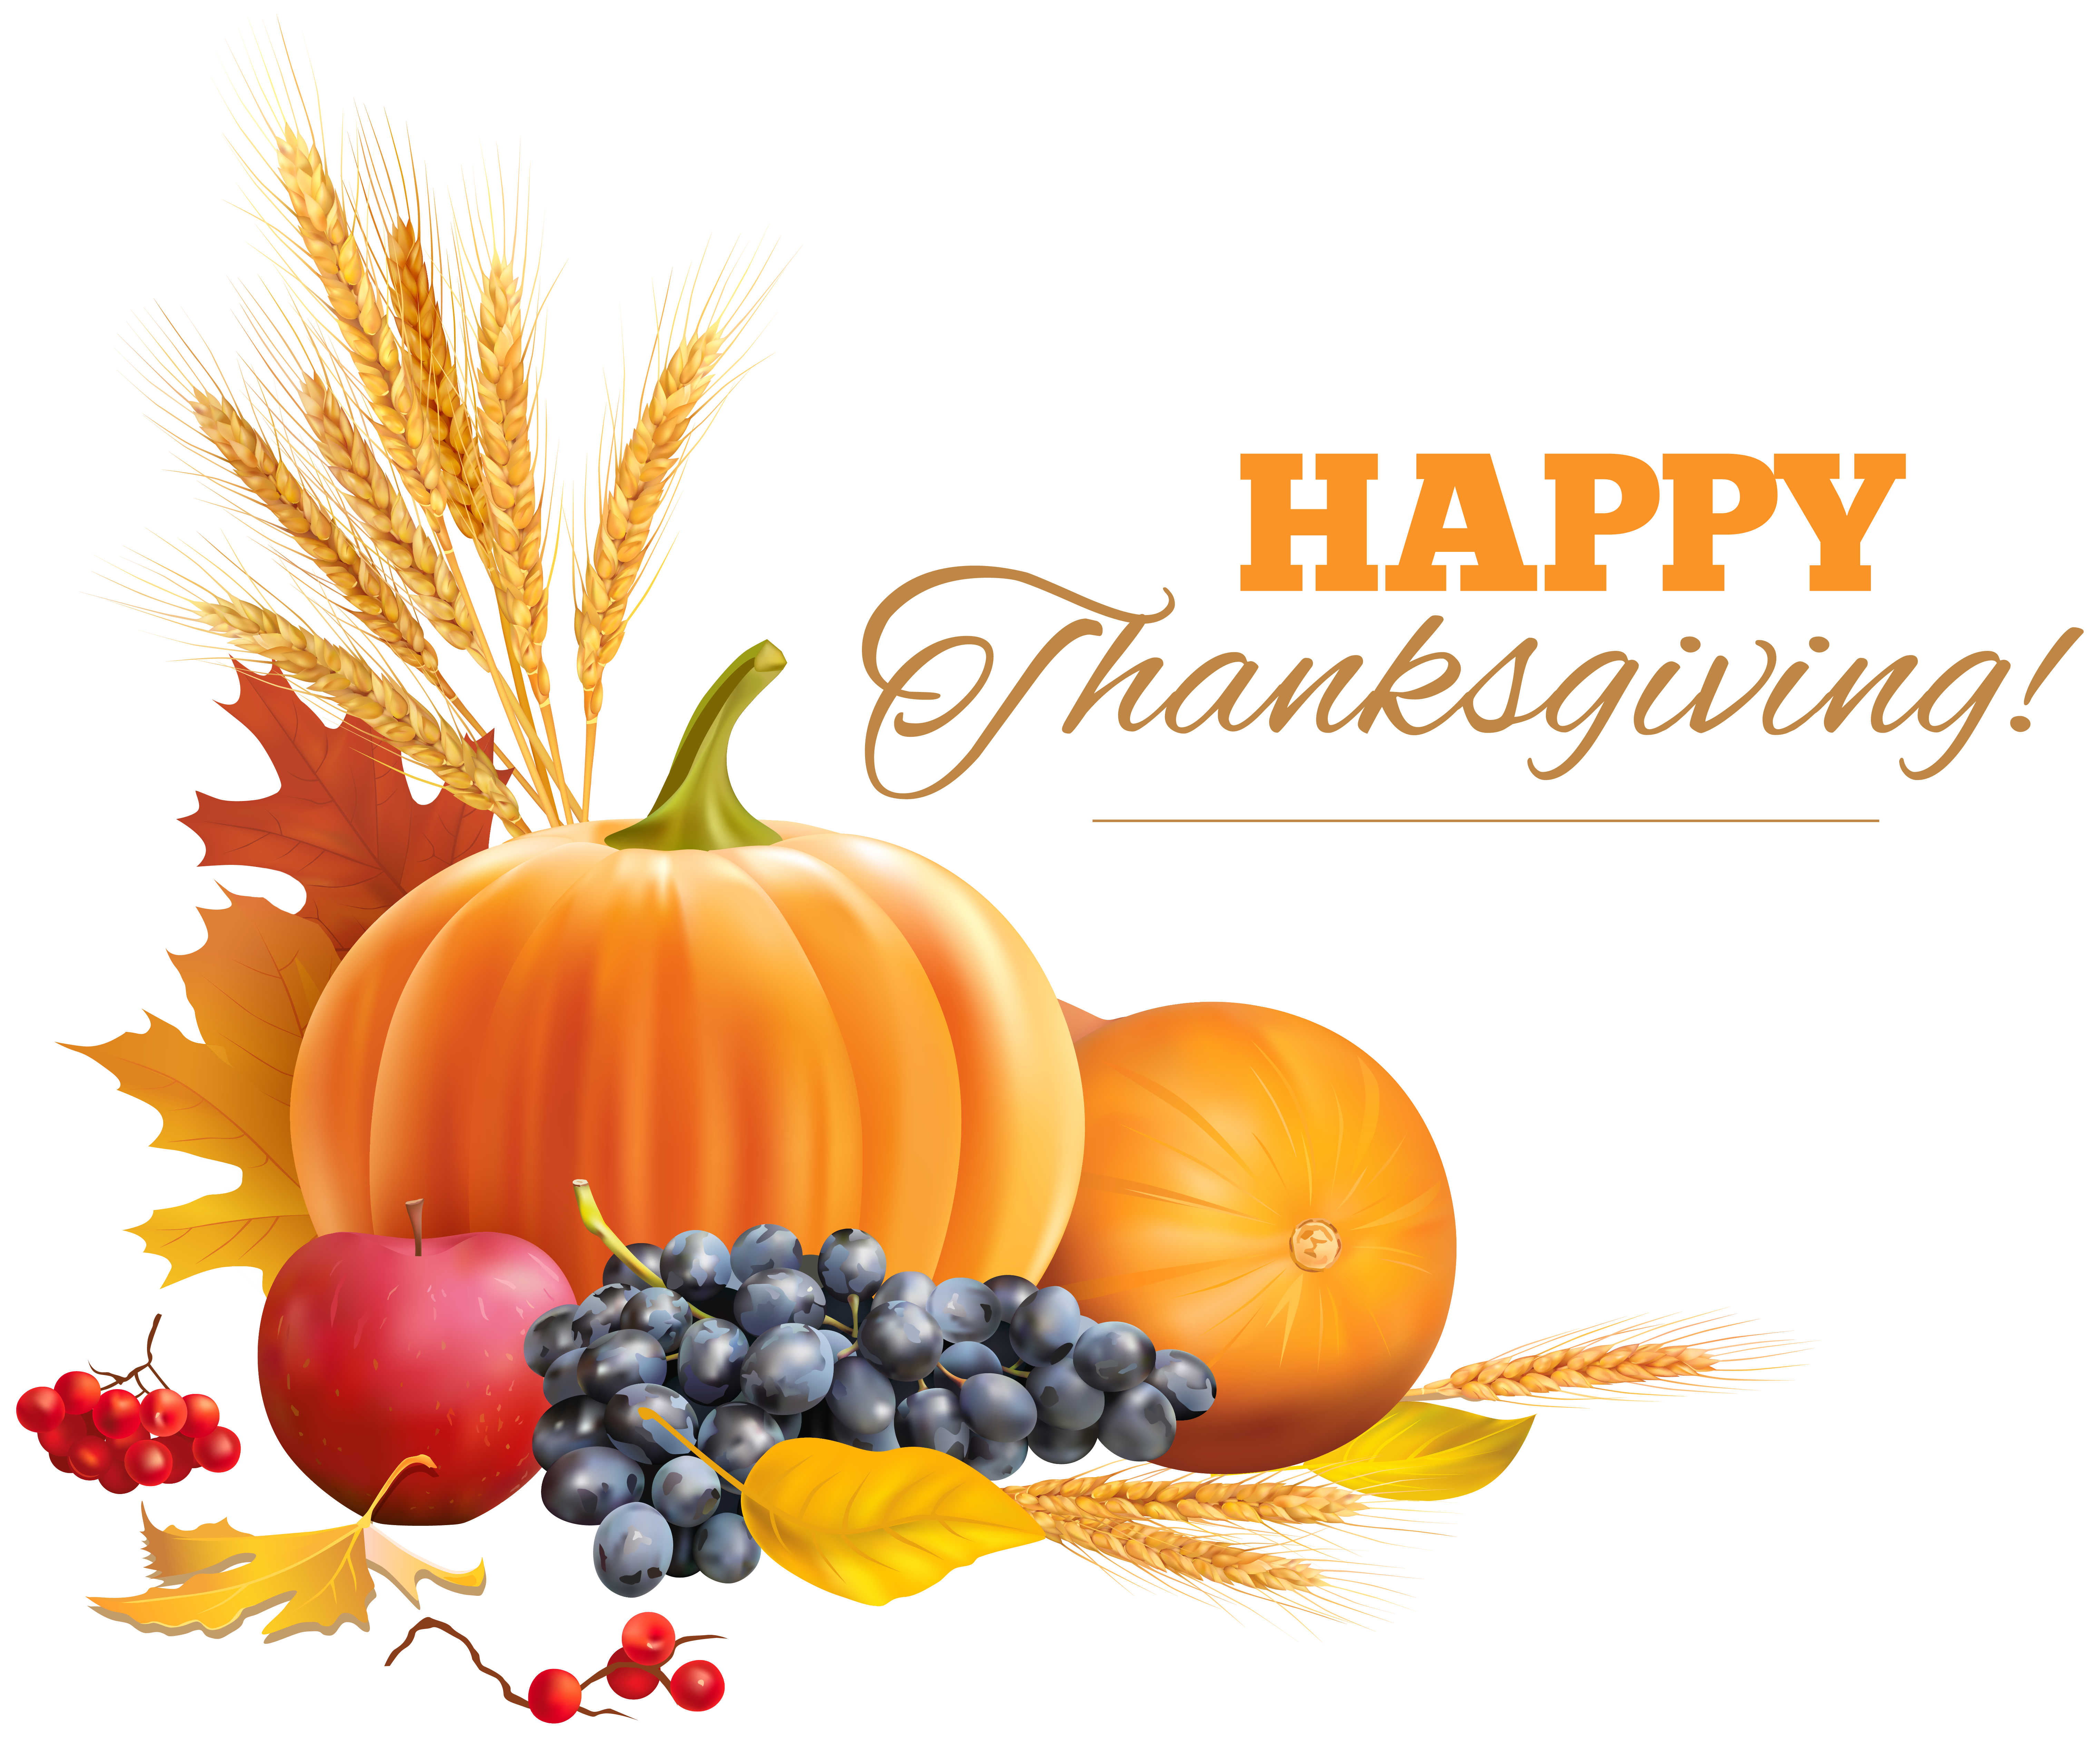 Happy decor clipart image. Thanksgiving png images